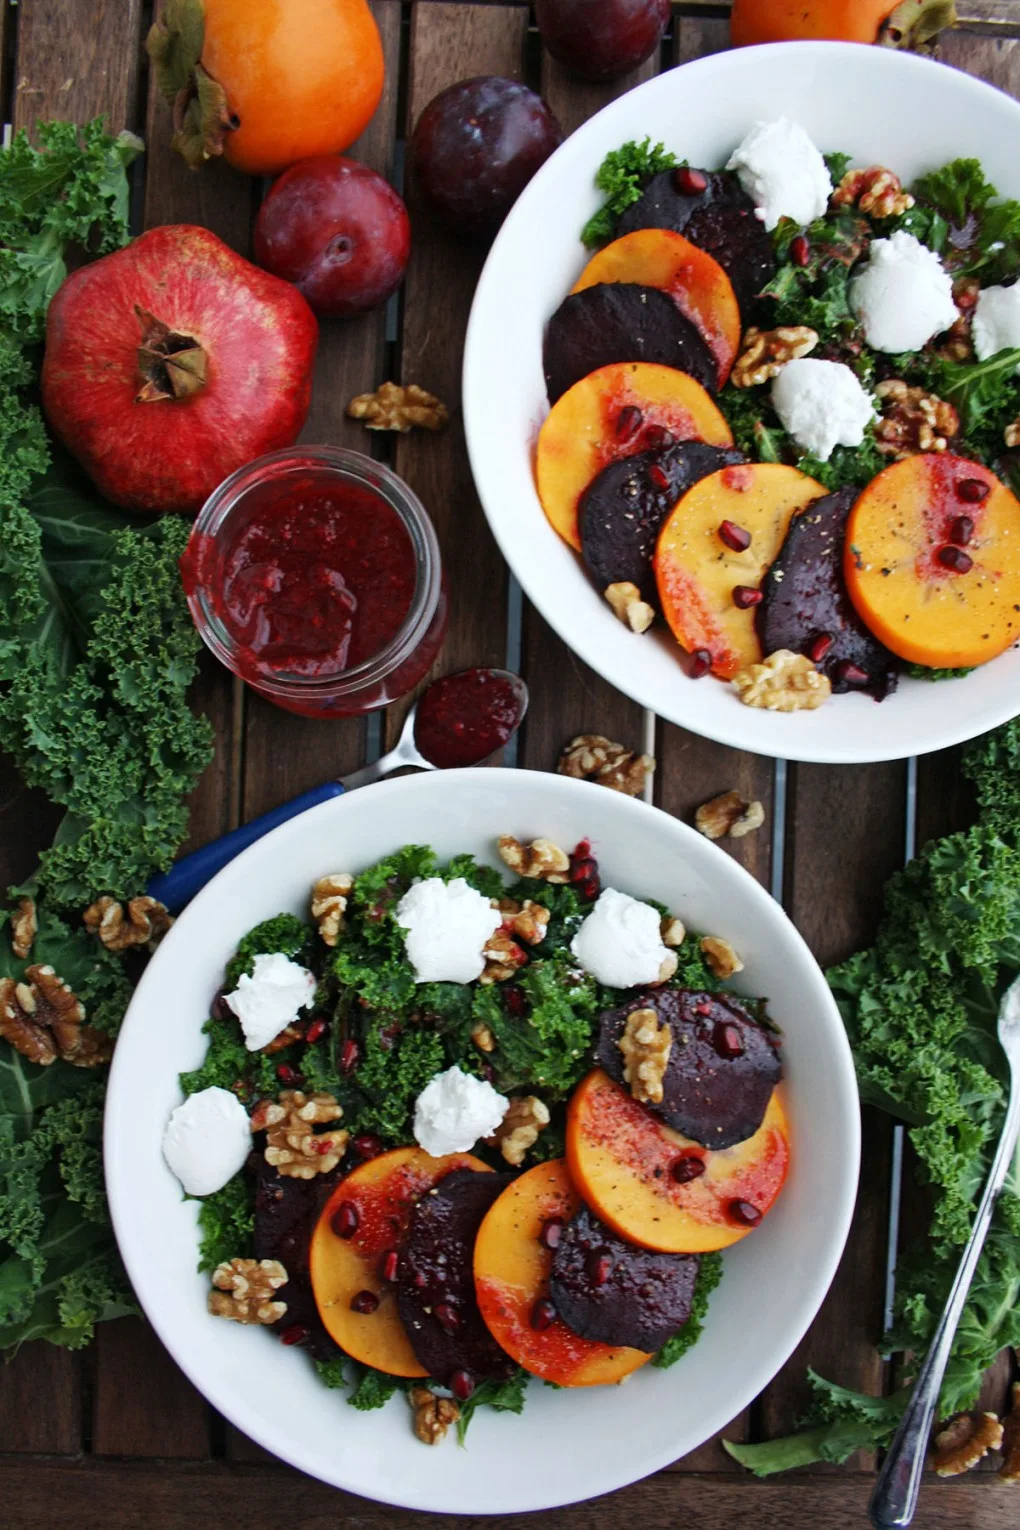 Persimmon Beet Salad with Goat Cheese and Kale